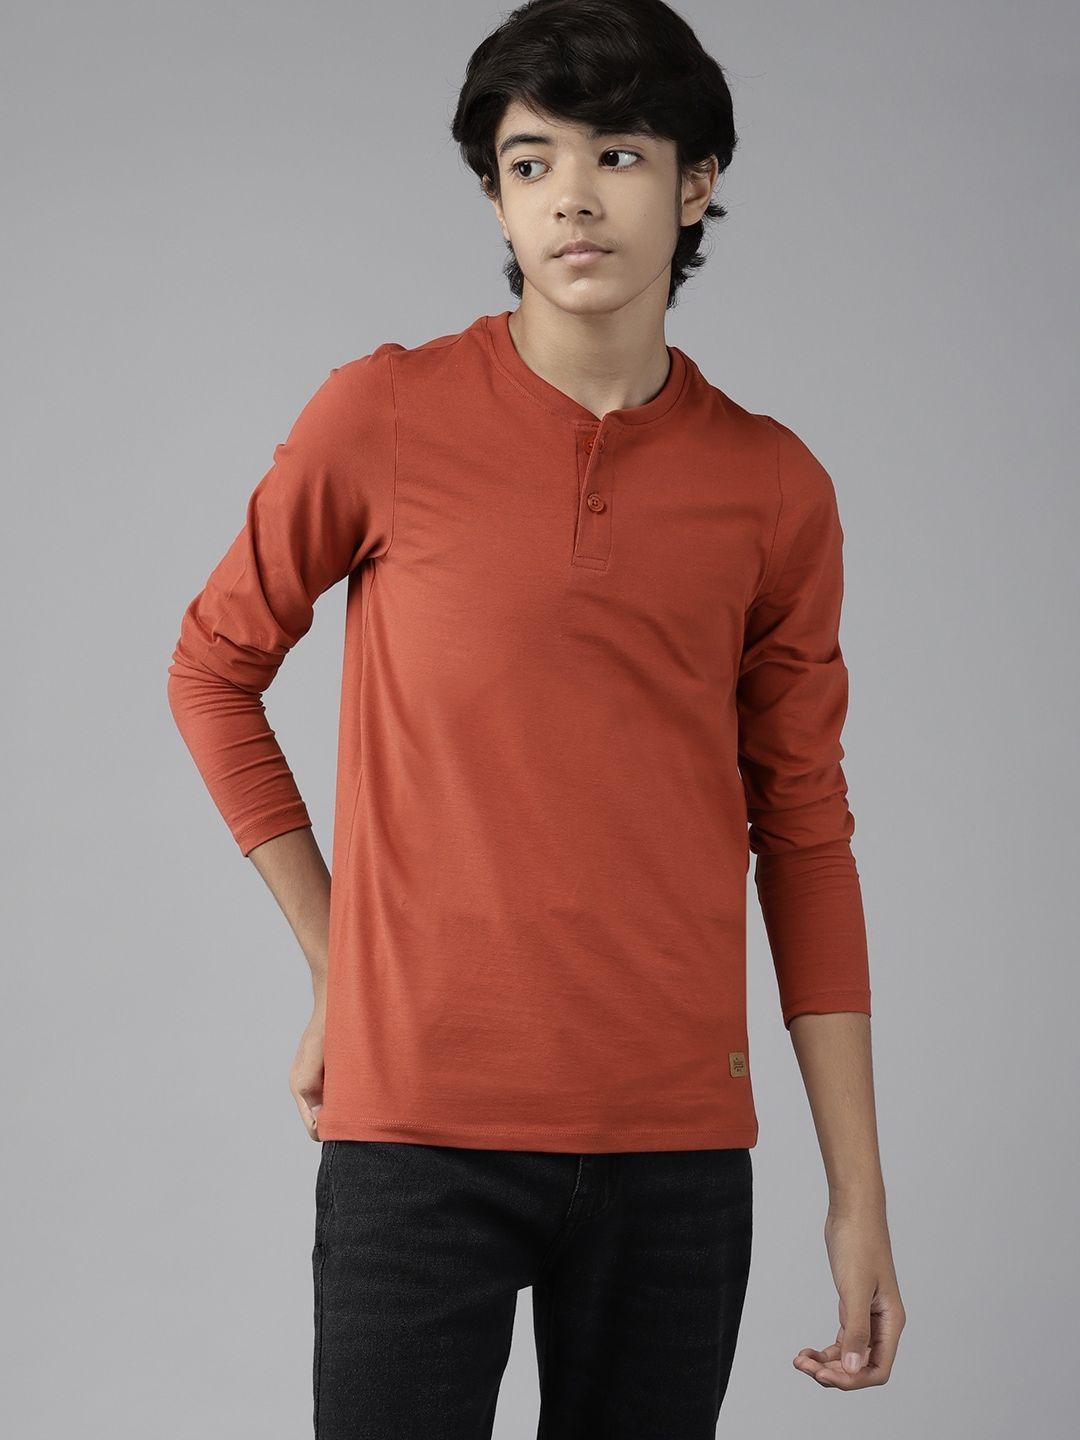 uth by roadster boys rust orange solid henley neck t-shirt